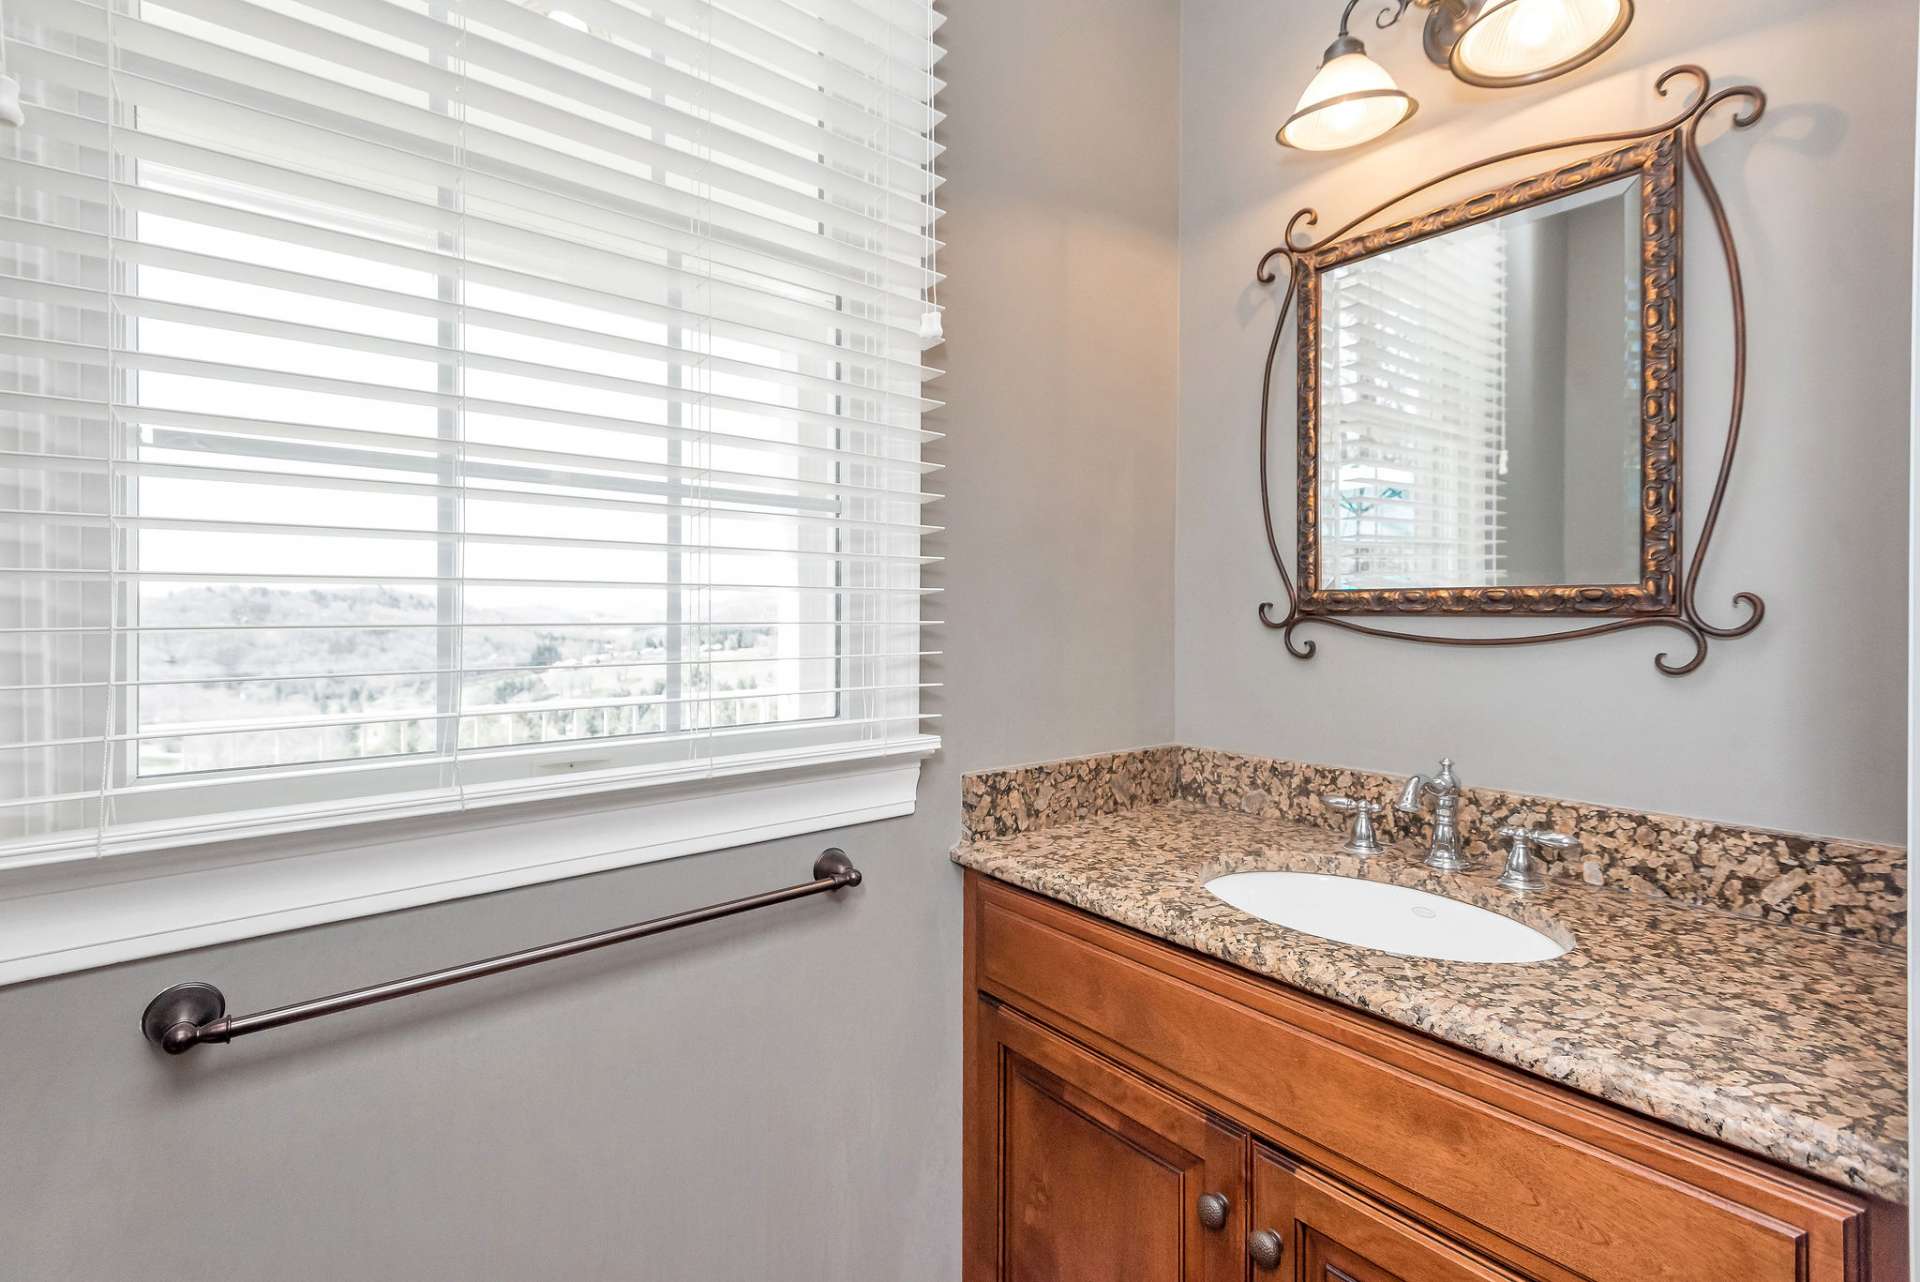 Powder room, conveniently nestled just off the kitchen, providing easy access for guests and residents alike.